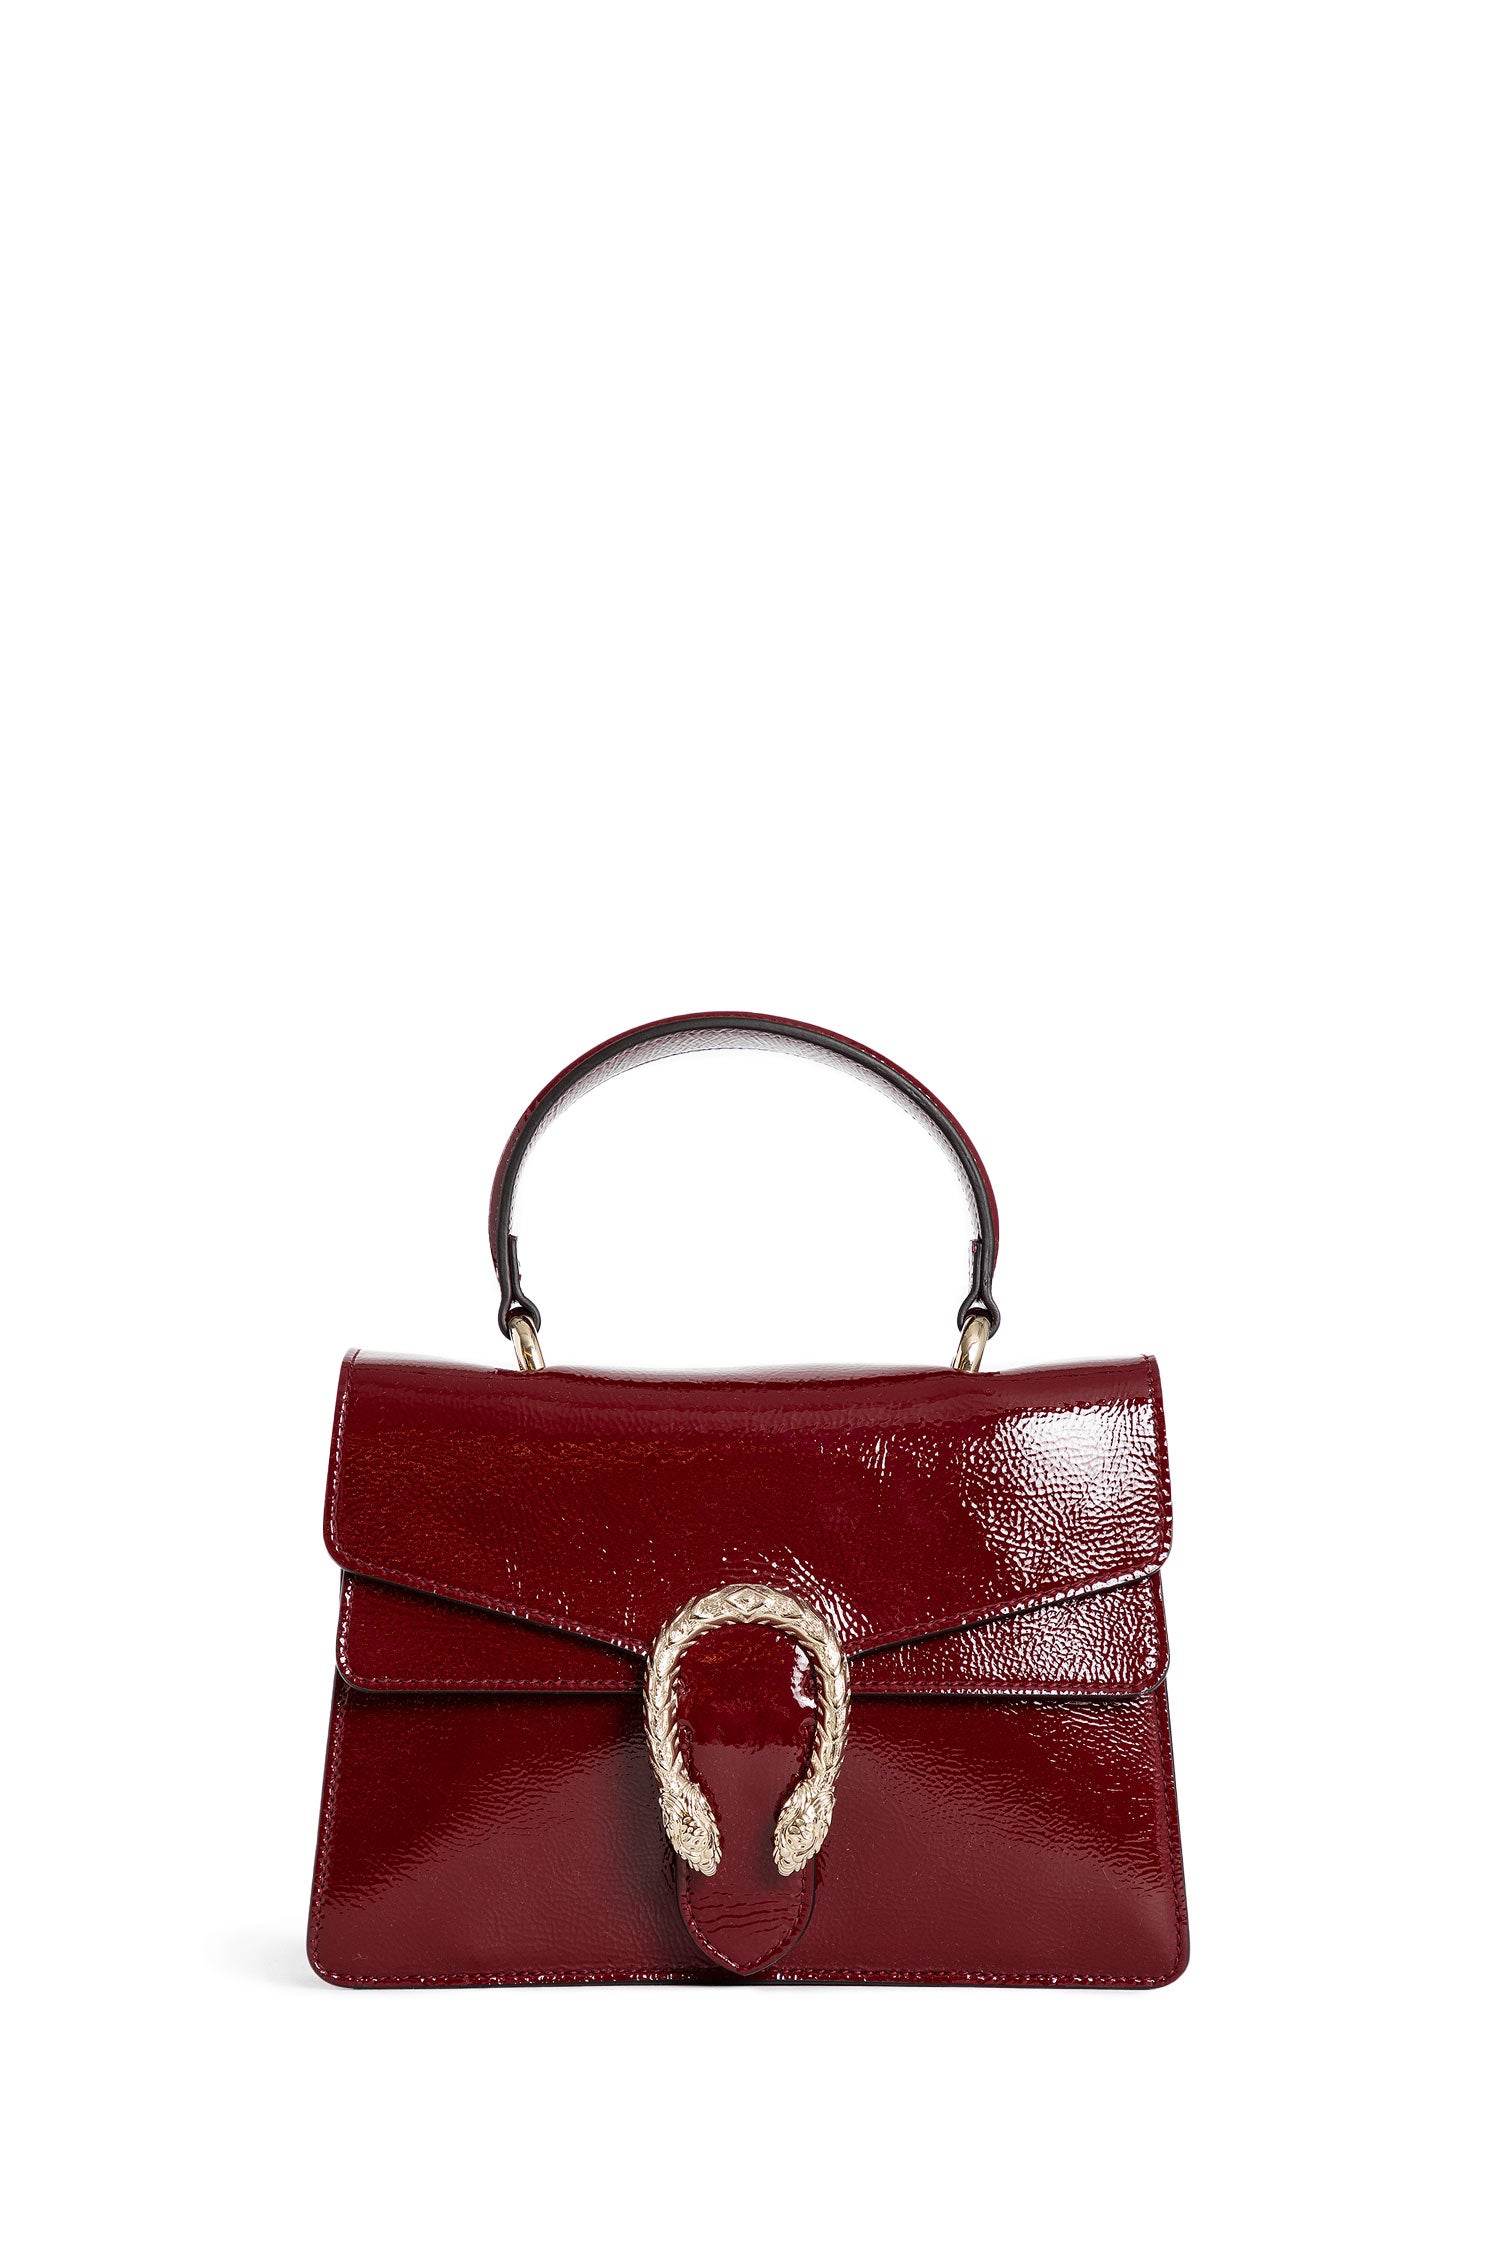 GUCCI WOMAN RED TOP HANDLE BAGS